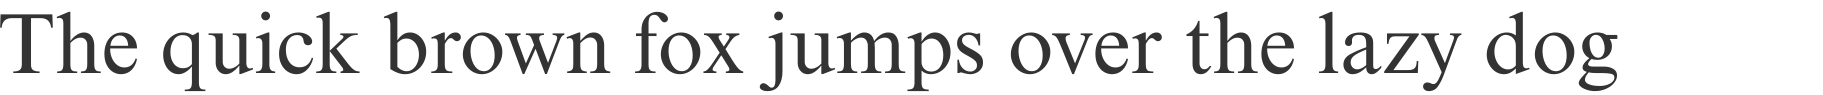 An example of the Times New Roman font